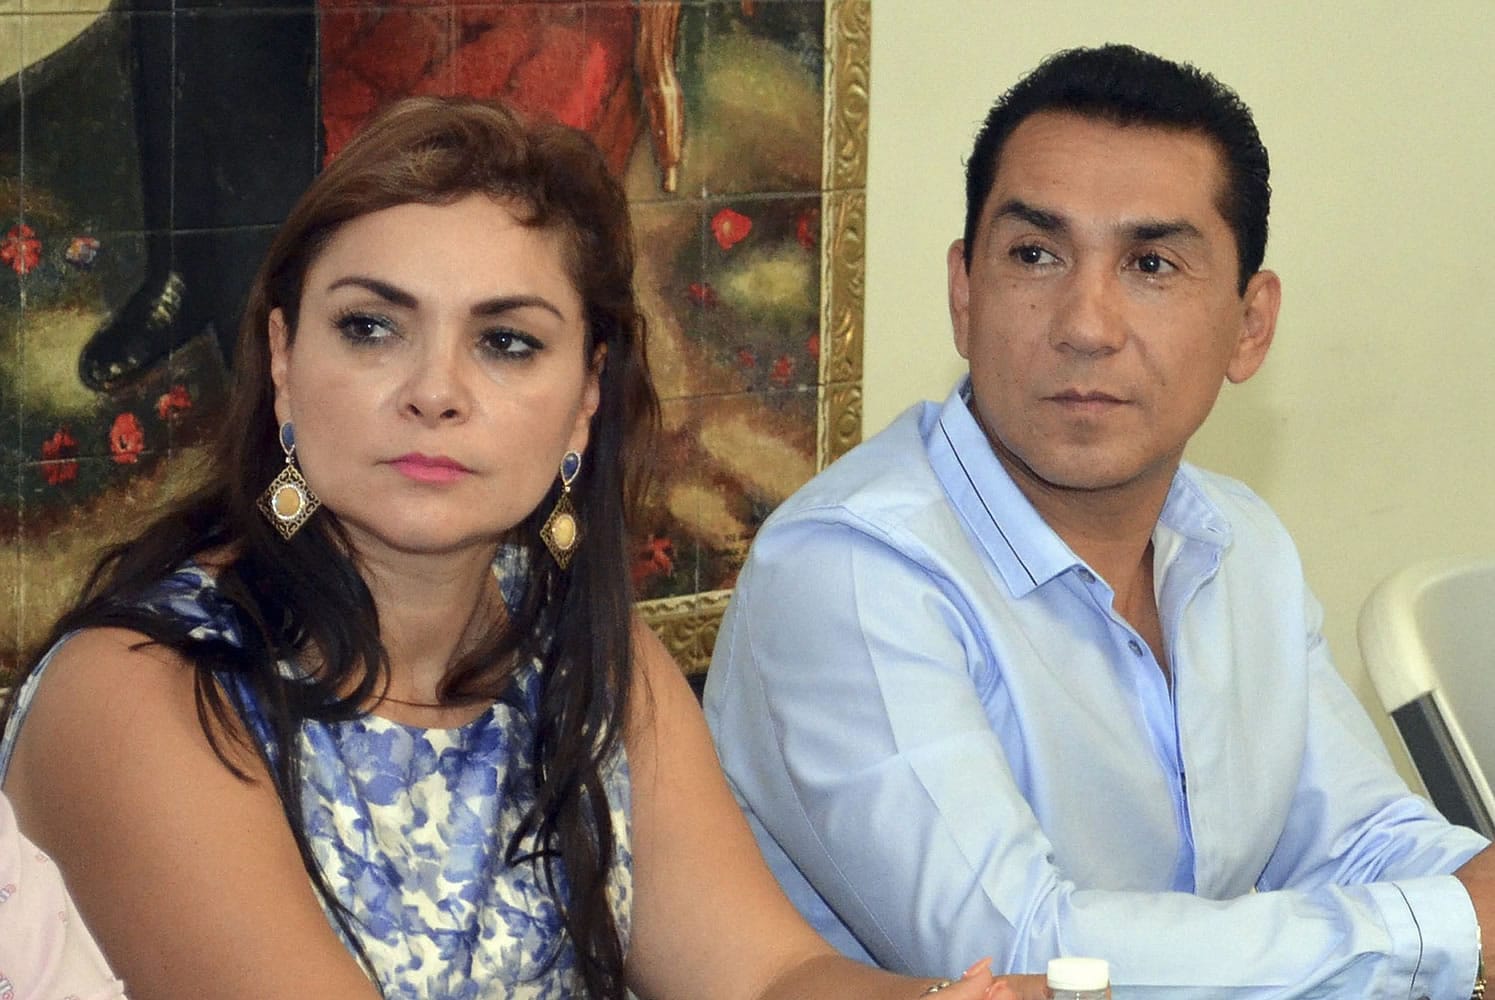 The mayor of the city of Iguala, Jose Luis Abarca, right, and his wife Maria de los Angeles Pineda Villa meet with state government officials in Chilpancingo, Mexico.